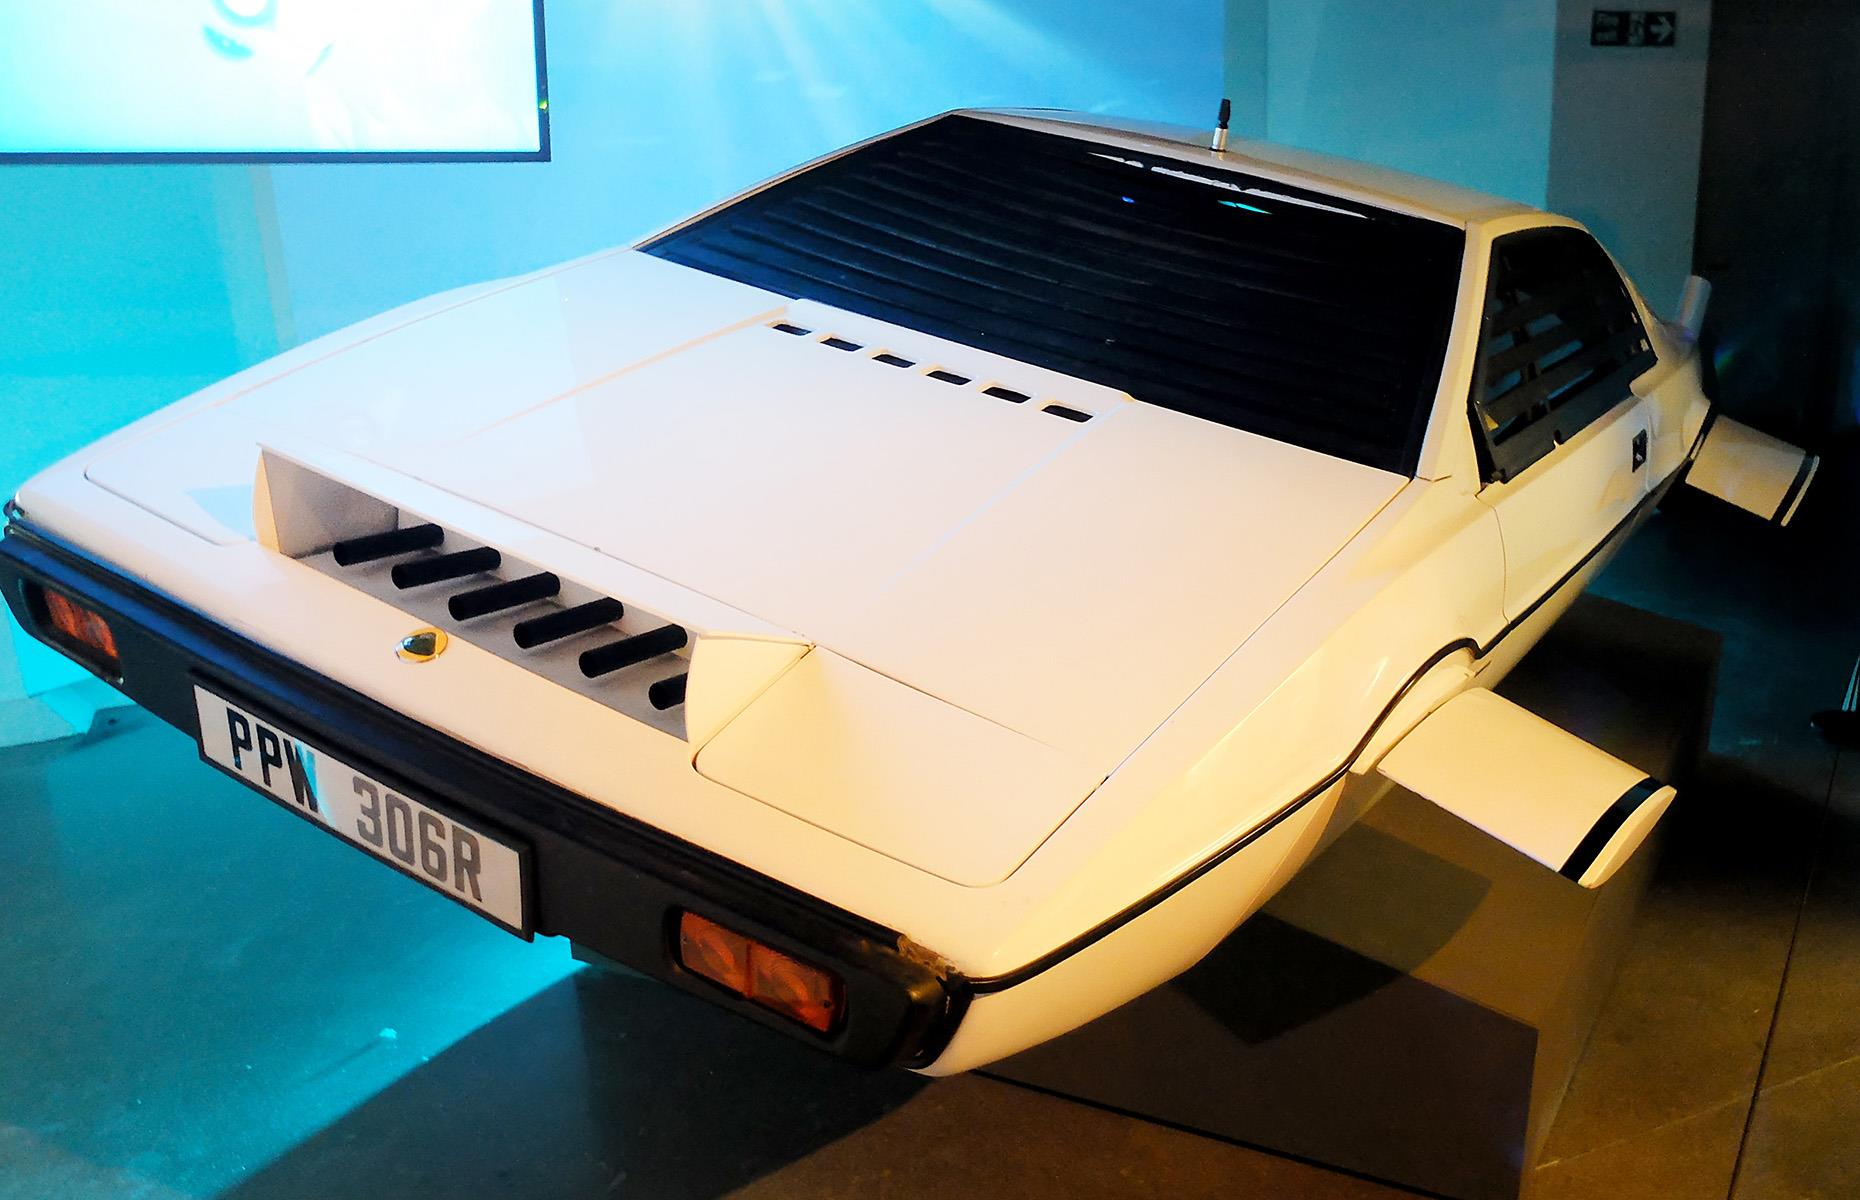 <p>Some critics have compared the controversial Musk to a real-life <em>James Bond</em> villain, so it's little surprise that he actually owns a car from the spy thriller franchise.</p>  <p>In 2013, he snapped up the Lotus Esprit car (pictured) driven by James Bond in <em>The Spy Who Loved Me</em>, purchasing it for around $895,000 in today's money. Speaking of his fondness for the car, Musk said: "It was amazing as a little kid in South Africa to watch James Bond in <em>The Spy Who Loved Me</em> drive his Lotus Esprit off a pier, press a button, and have it transform into a submarine underwater.</p>  <p> "I was disappointed to learn that it can't actually transform."</p>  <p>The billionaire joked that he was going to "upgrade [the car] with a Tesla electric powertrain and try to make it transform for real." It's unclear whether or not this idea became a reality – but we wouldn't put anything past him.</p>  <p><strong>Now find out <a href="https://www.lovemoney.com/gallerylist/64832/the-billionaires-who-got-richest-quickest-revealed">how long it took these people to become billionaires</a></strong></p>